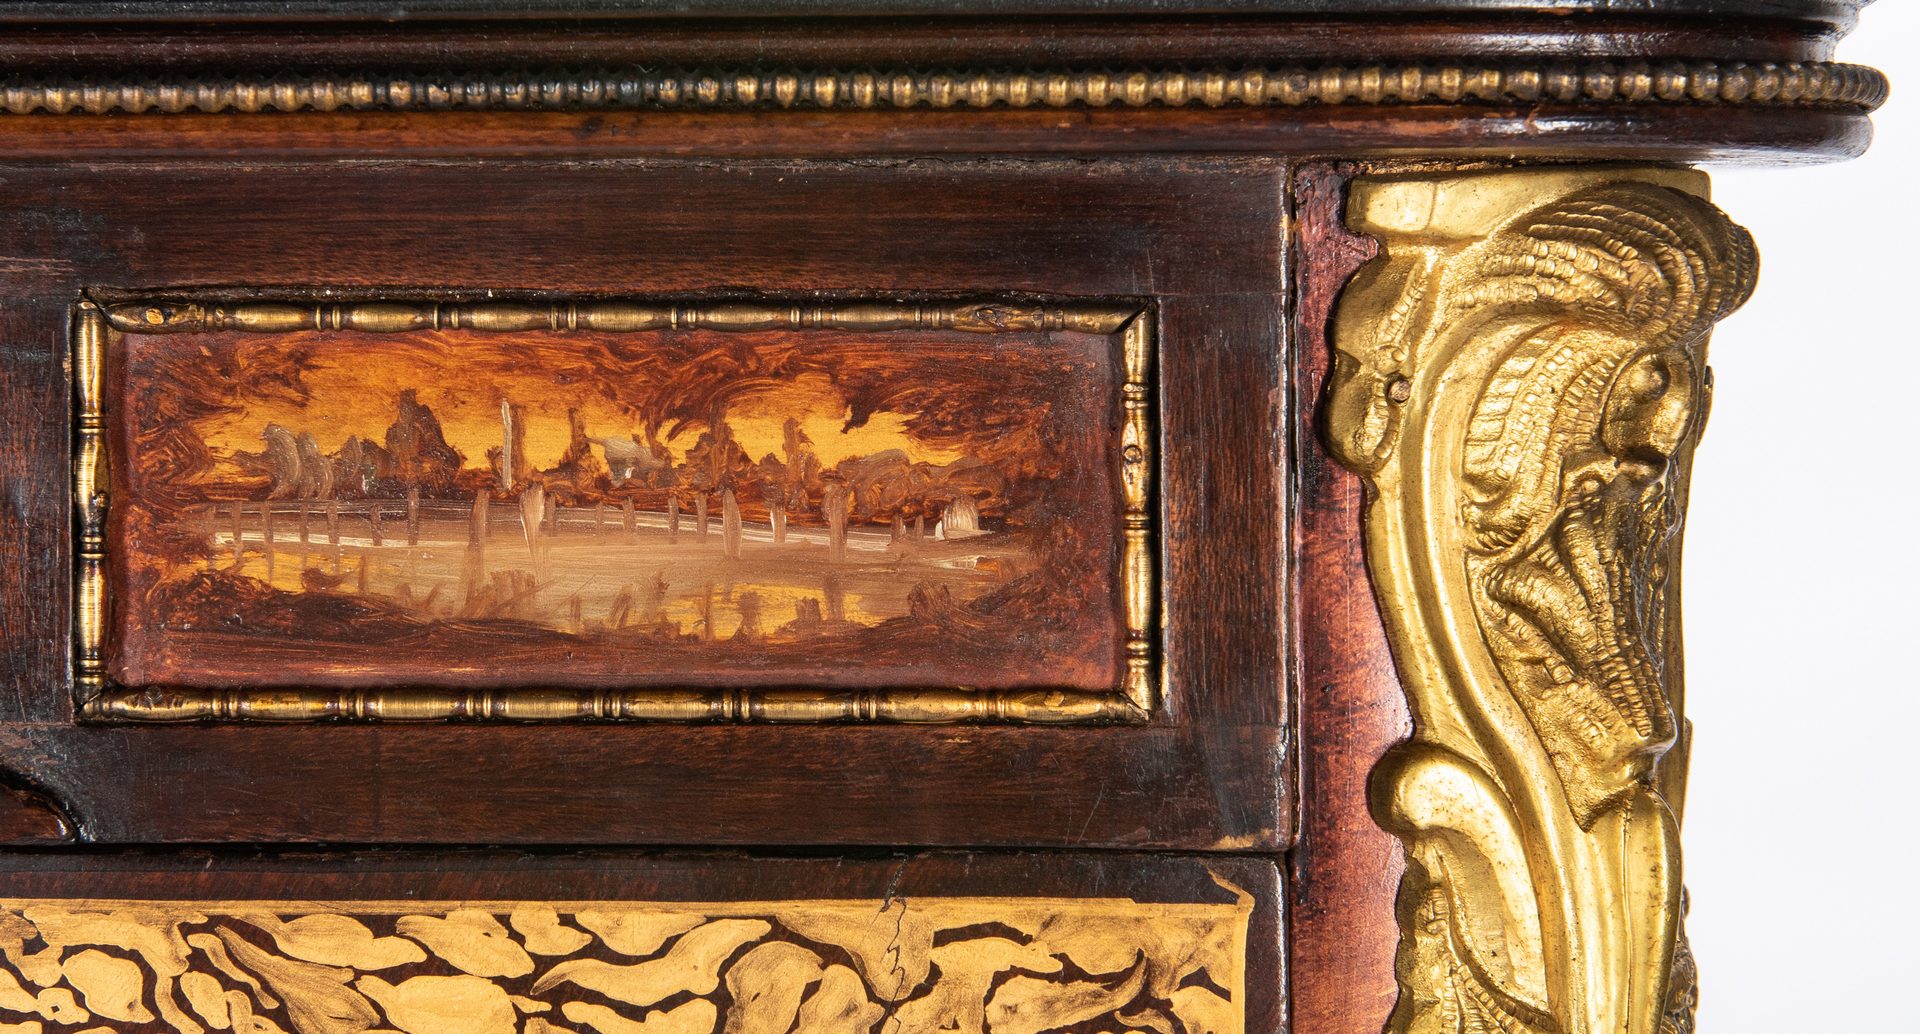 Lot 135: French Vitrine w/ Painted Scenes